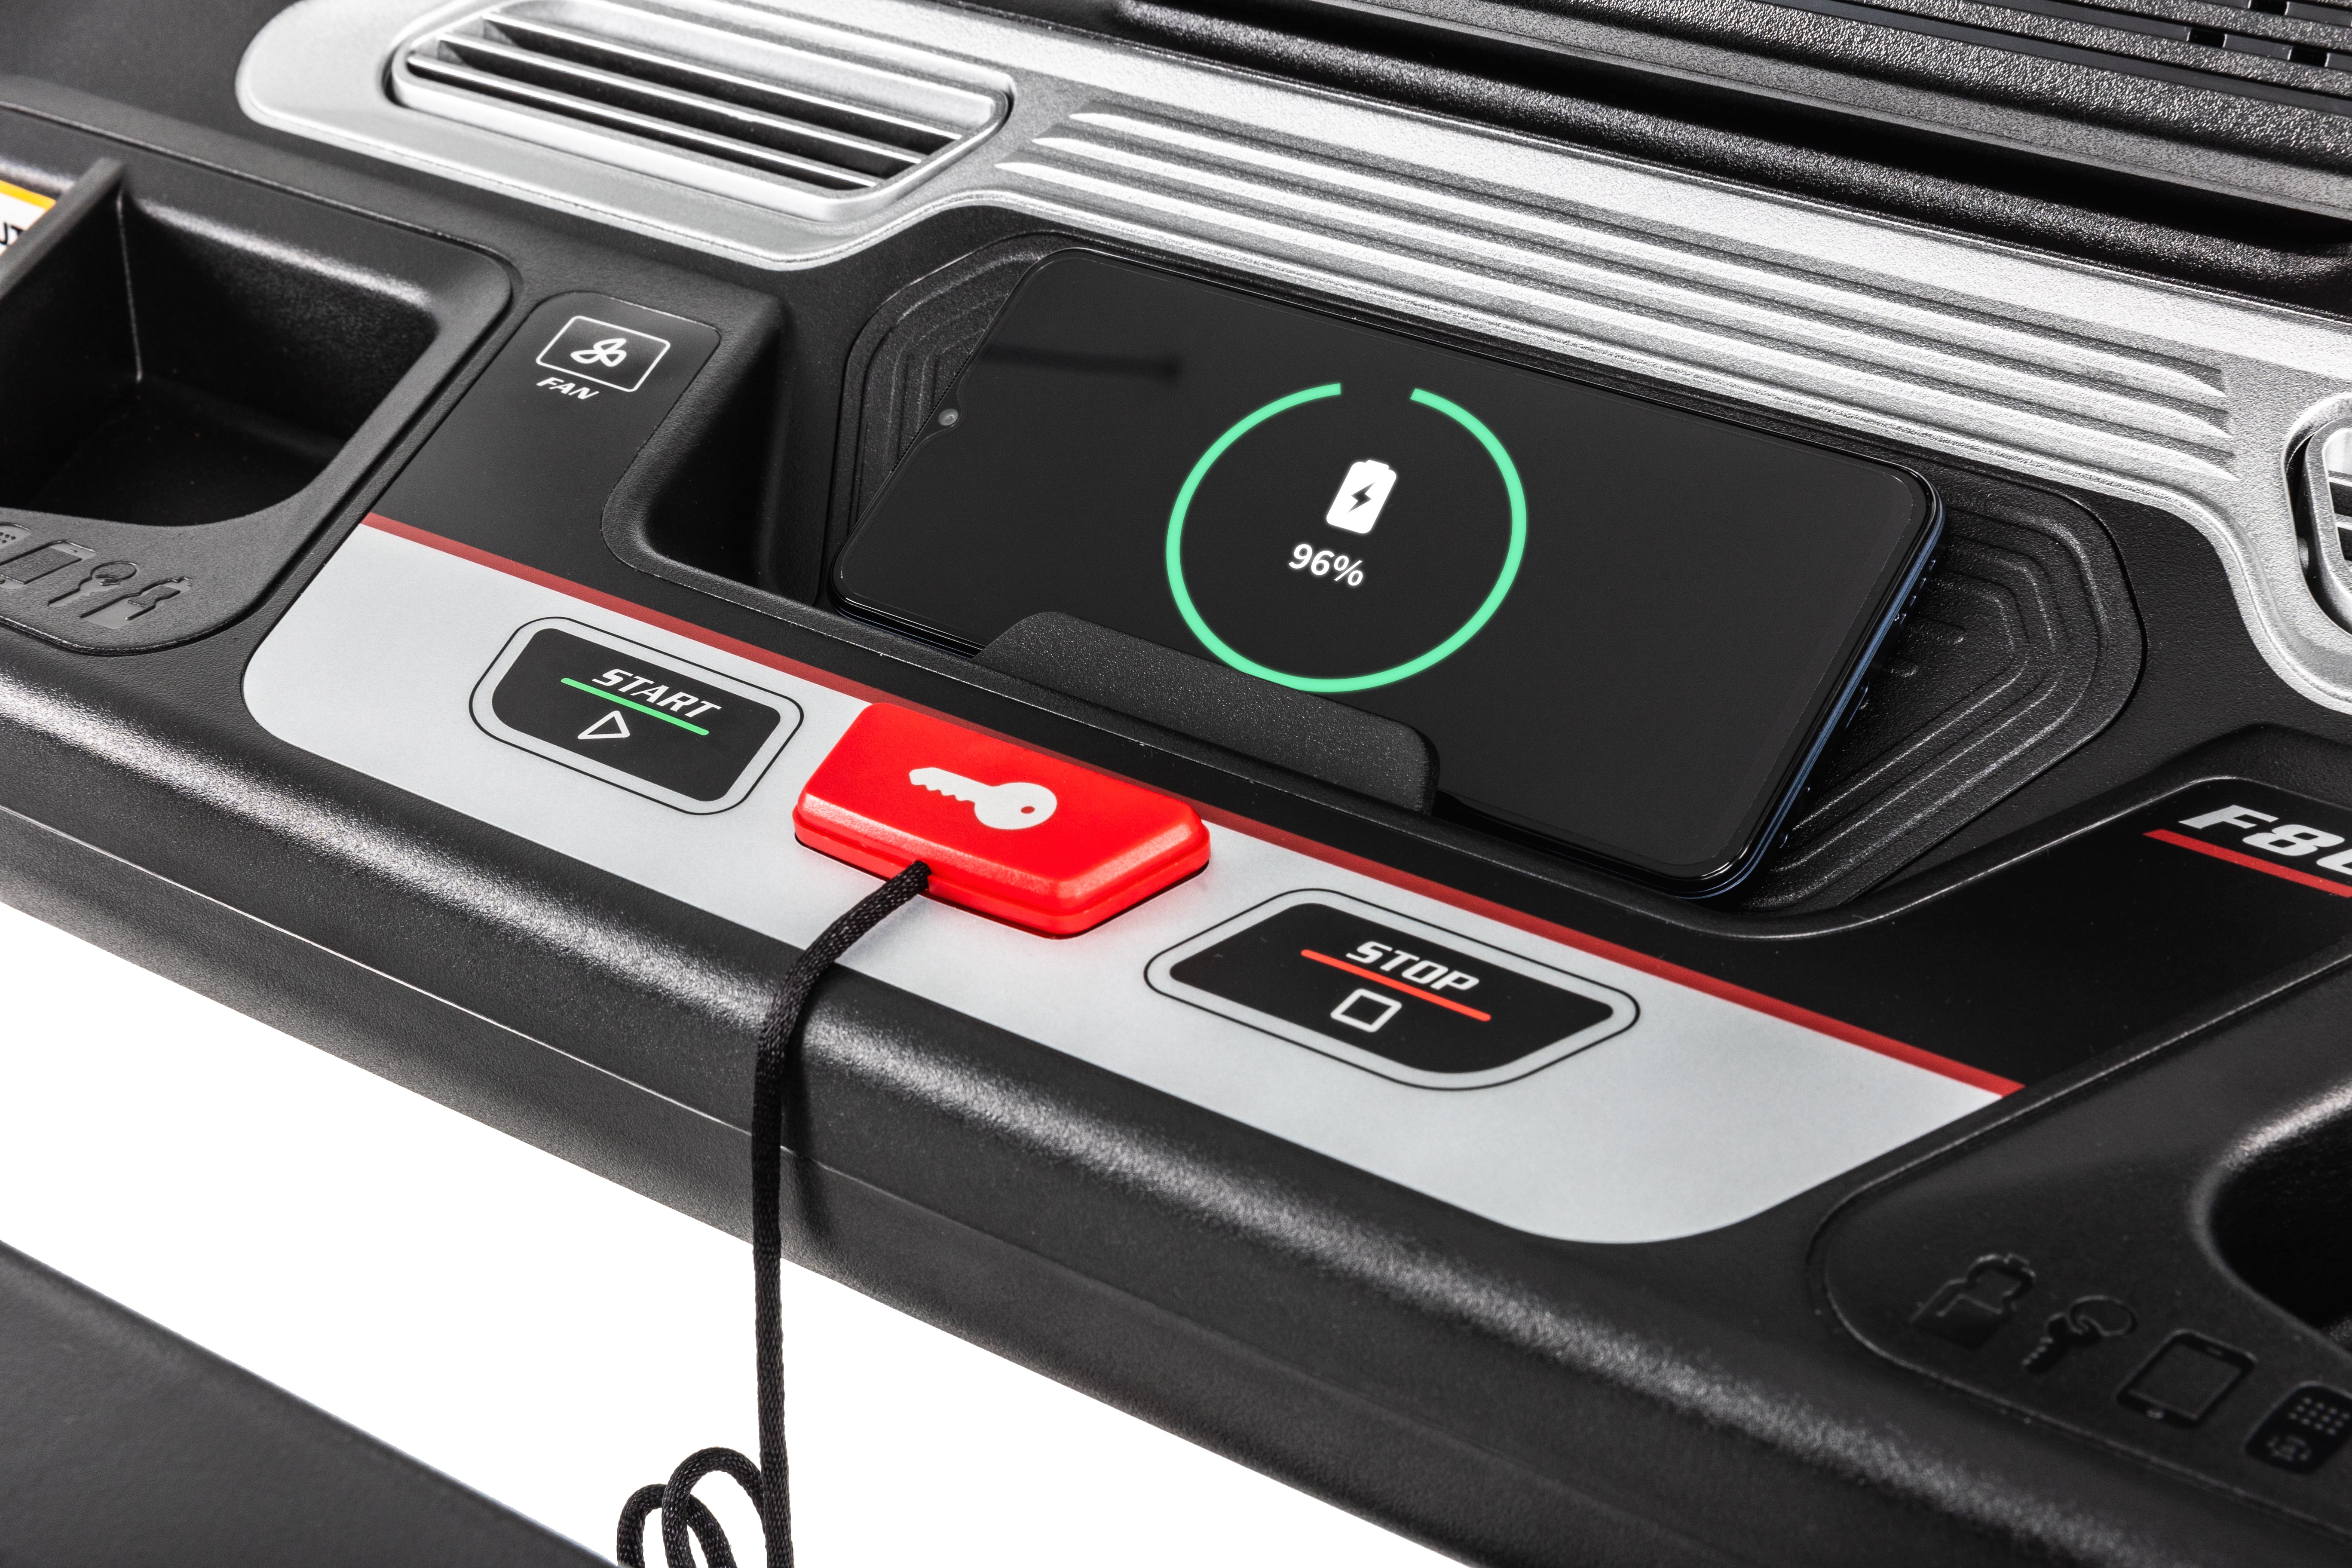 Close-up of the Sole F80 treadmill's control panel showing a smartphone with a 96% charging indicator placed on the device holder. The panel includes a start button, a stop button, speed adjustment controls, a safety key, and an integrated charging port with a connected cable.